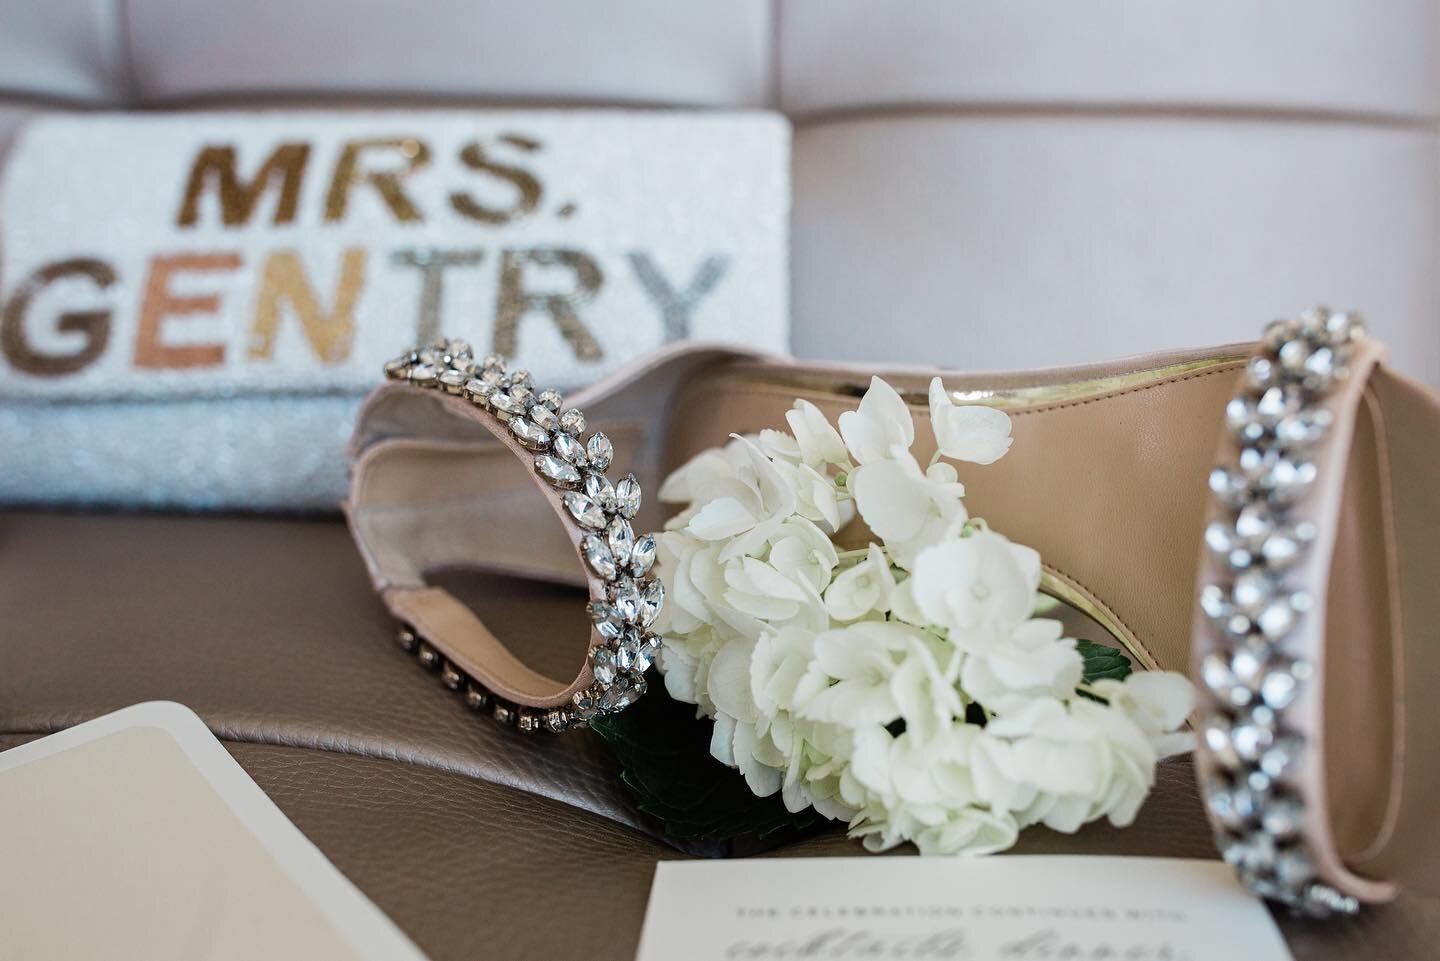 Extra special details are a totally must to make the wedding day, perfectly the couples! 
Photo by: @thegraysphotography 
.
.
.
.
#kcwedding #newlyweds #loveourclients #celebrationsoflove #celebrationsoflovekc #weddingplannerkc #itsallinthedetails #h